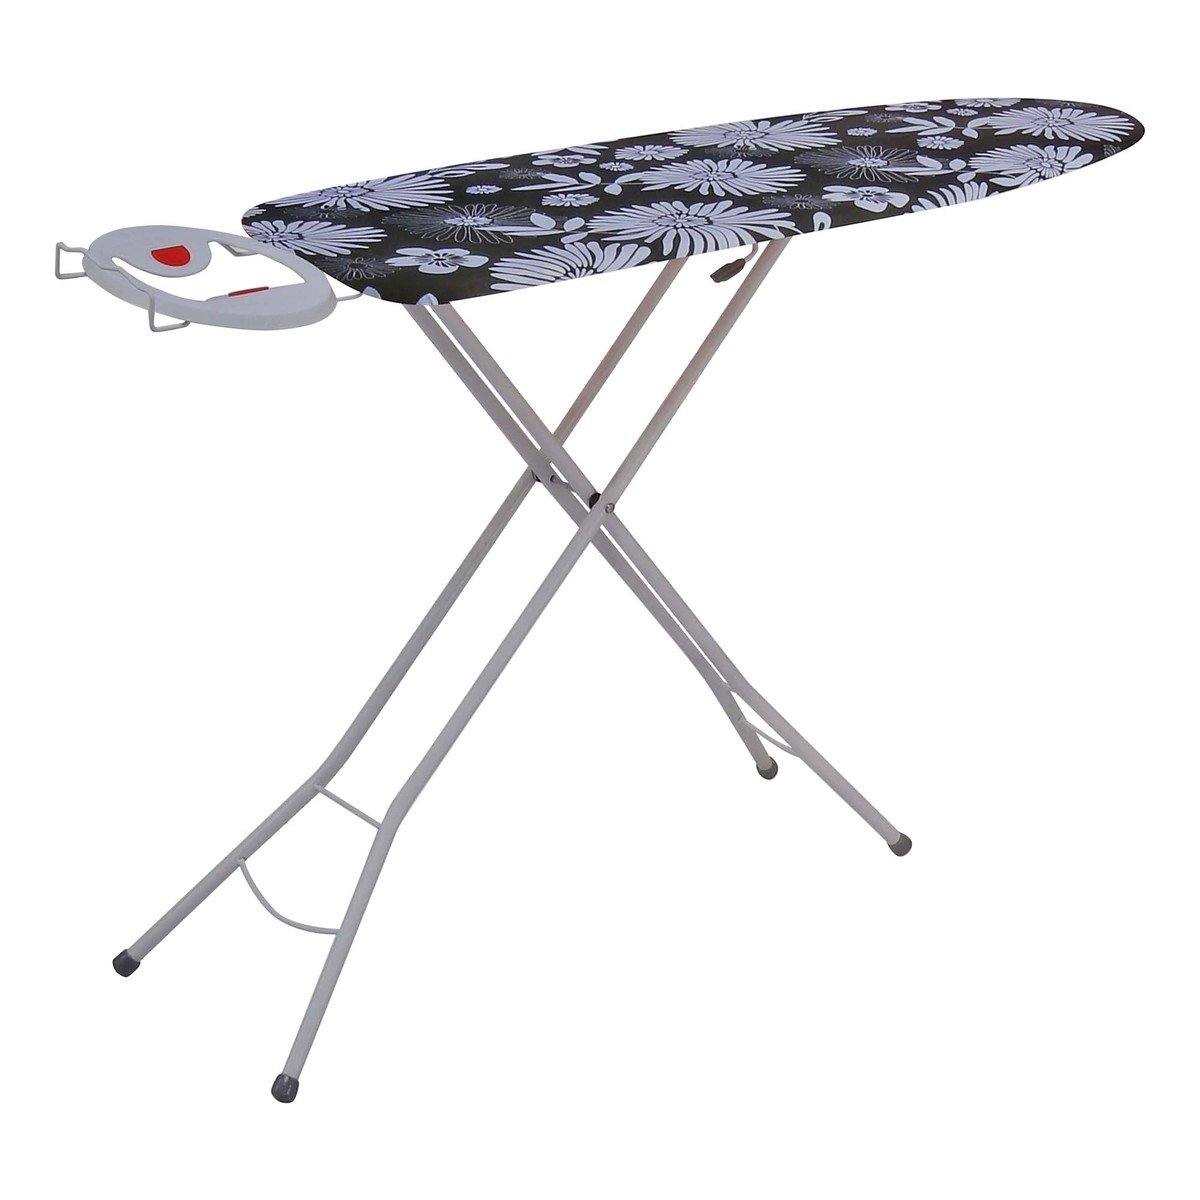 Straight Line Mesh Ironing Board DC654AM Assorted Colors